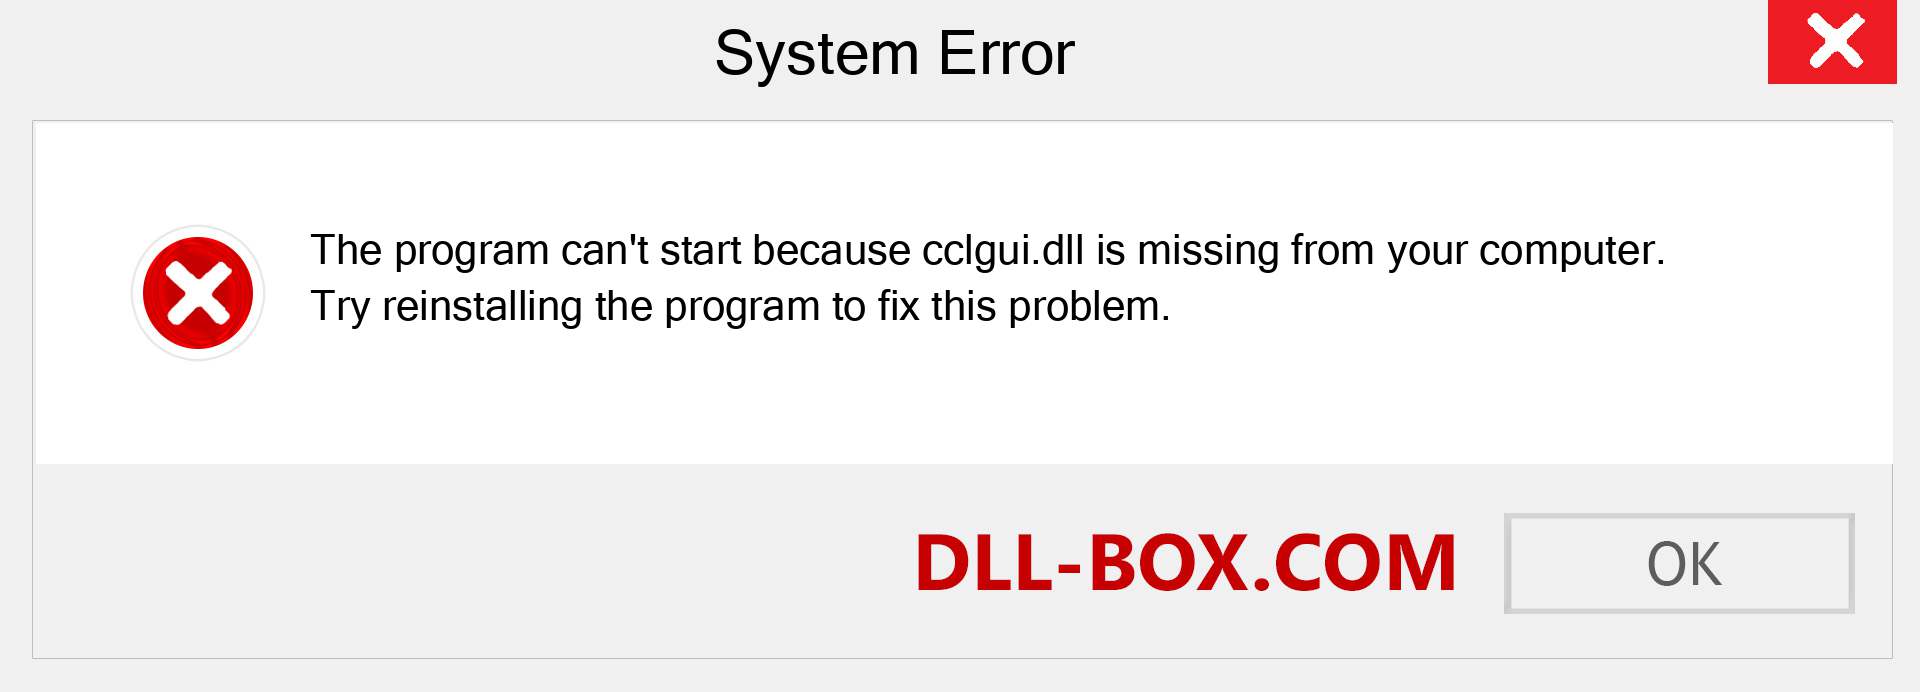  cclgui.dll file is missing?. Download for Windows 7, 8, 10 - Fix  cclgui dll Missing Error on Windows, photos, images